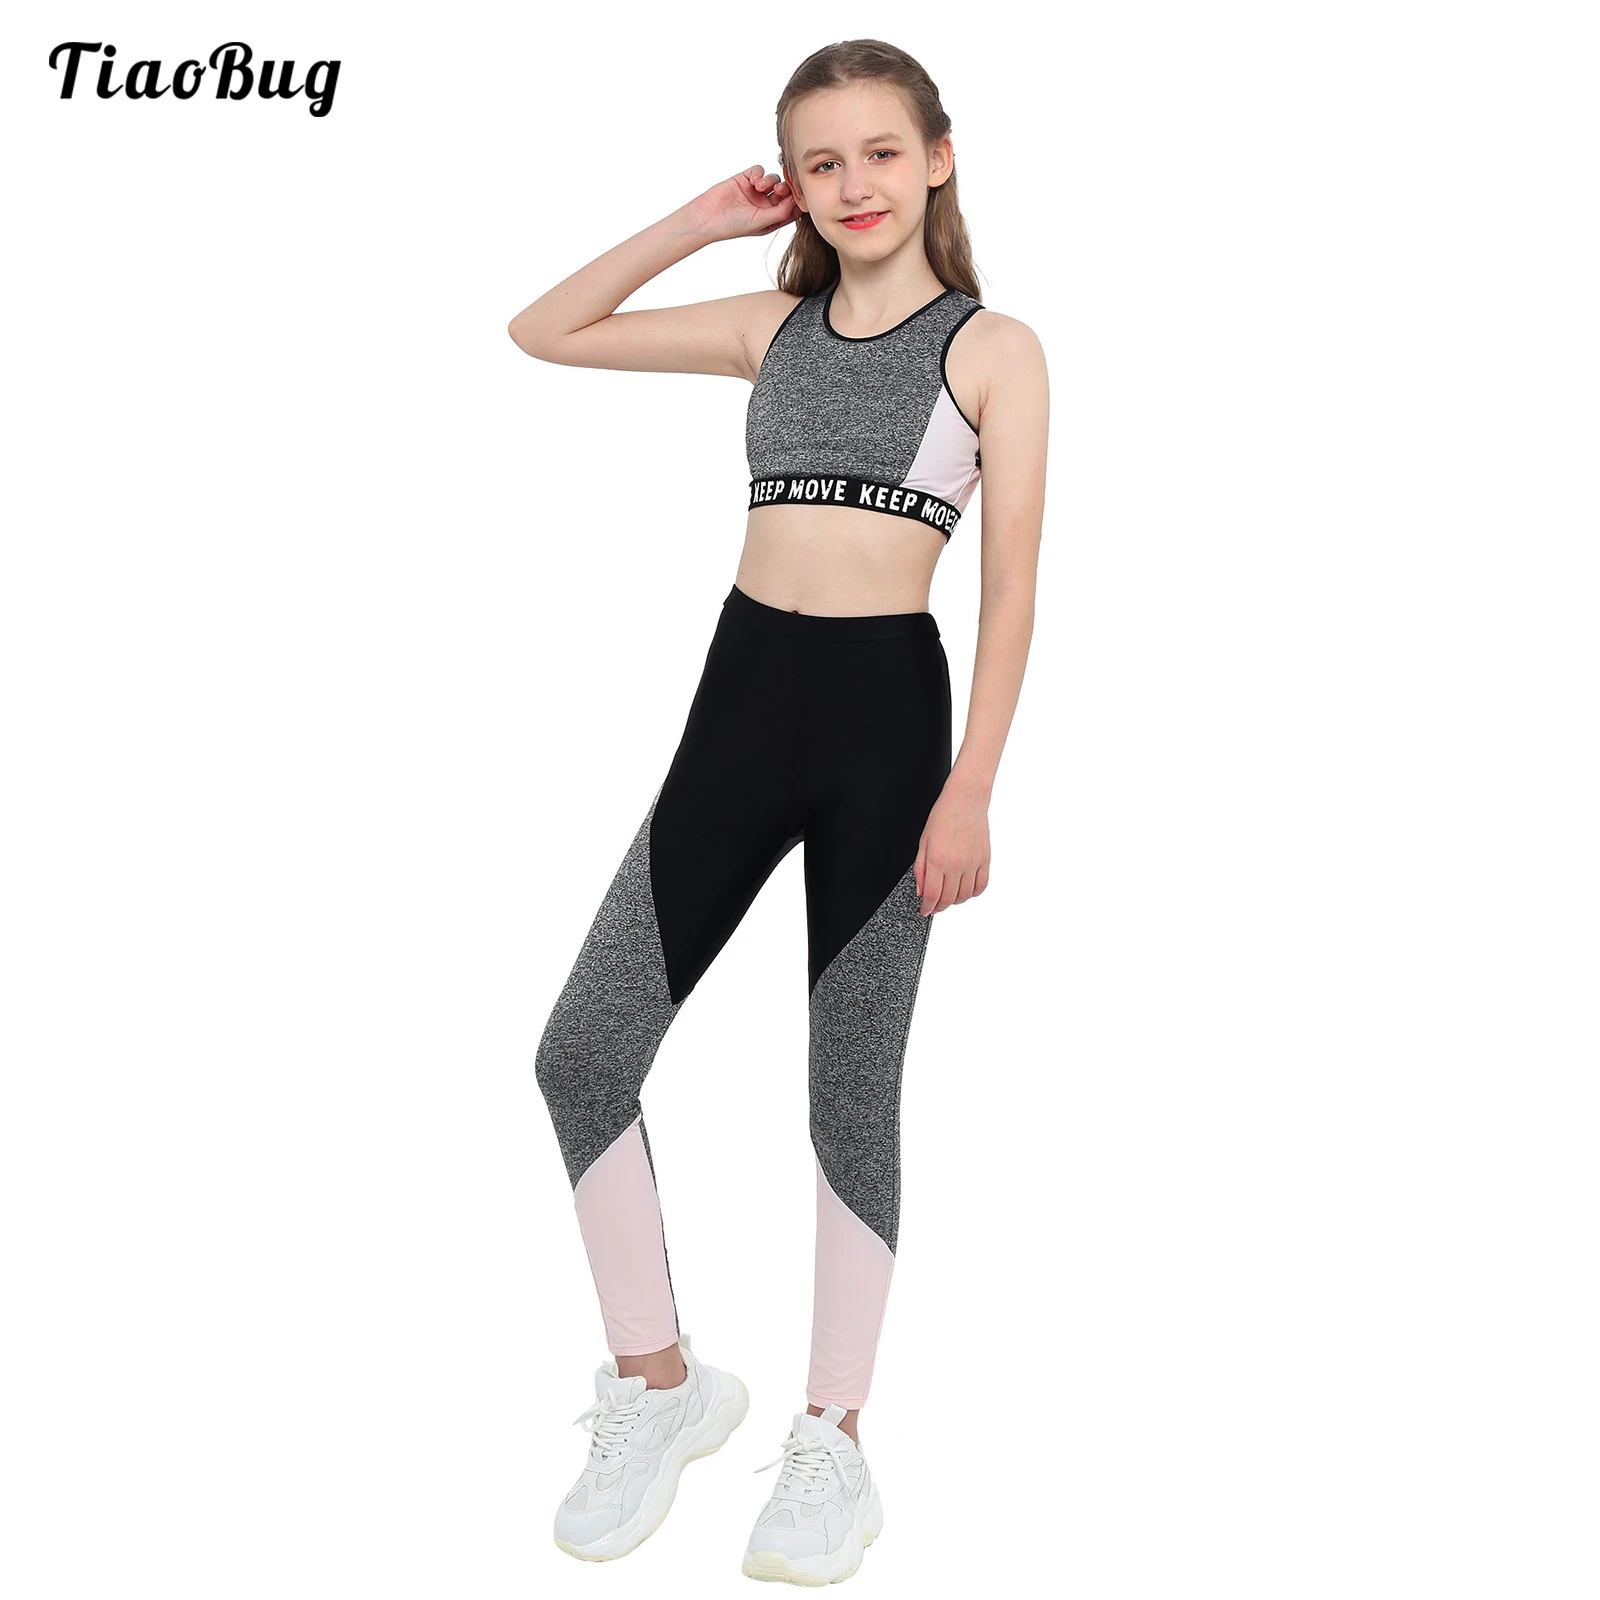 

TiaoBug Summer Kids Girls Workout Running Sports Suit Round Neckline Midriff-Baring Tops+Tight Pants Yoga Fitness Tracksuit